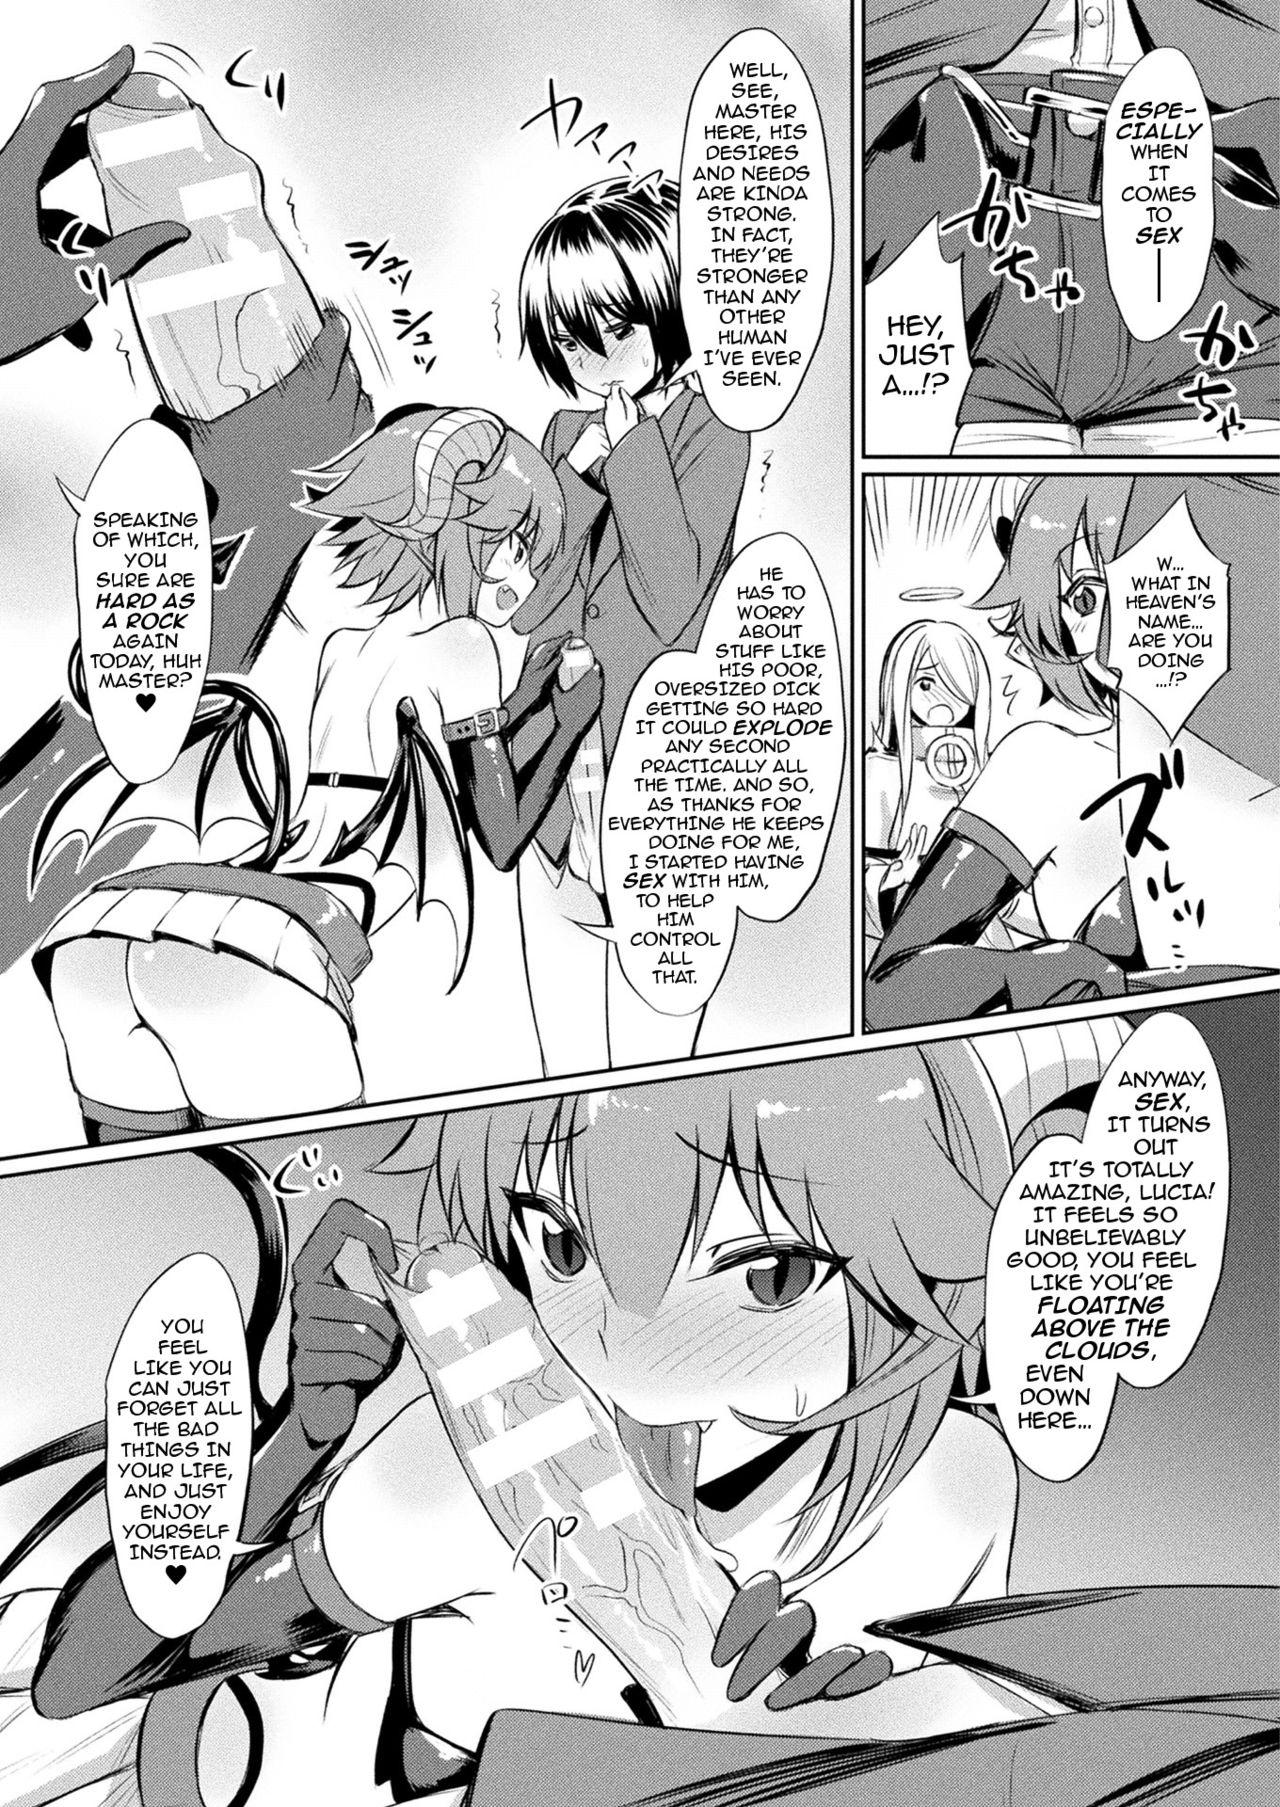 Three Some Kimochii Rakuten Shiyo | Let’s Enjoy the Pleasures of FALLING FROM GRACE Together Sucking Dick - Page 5